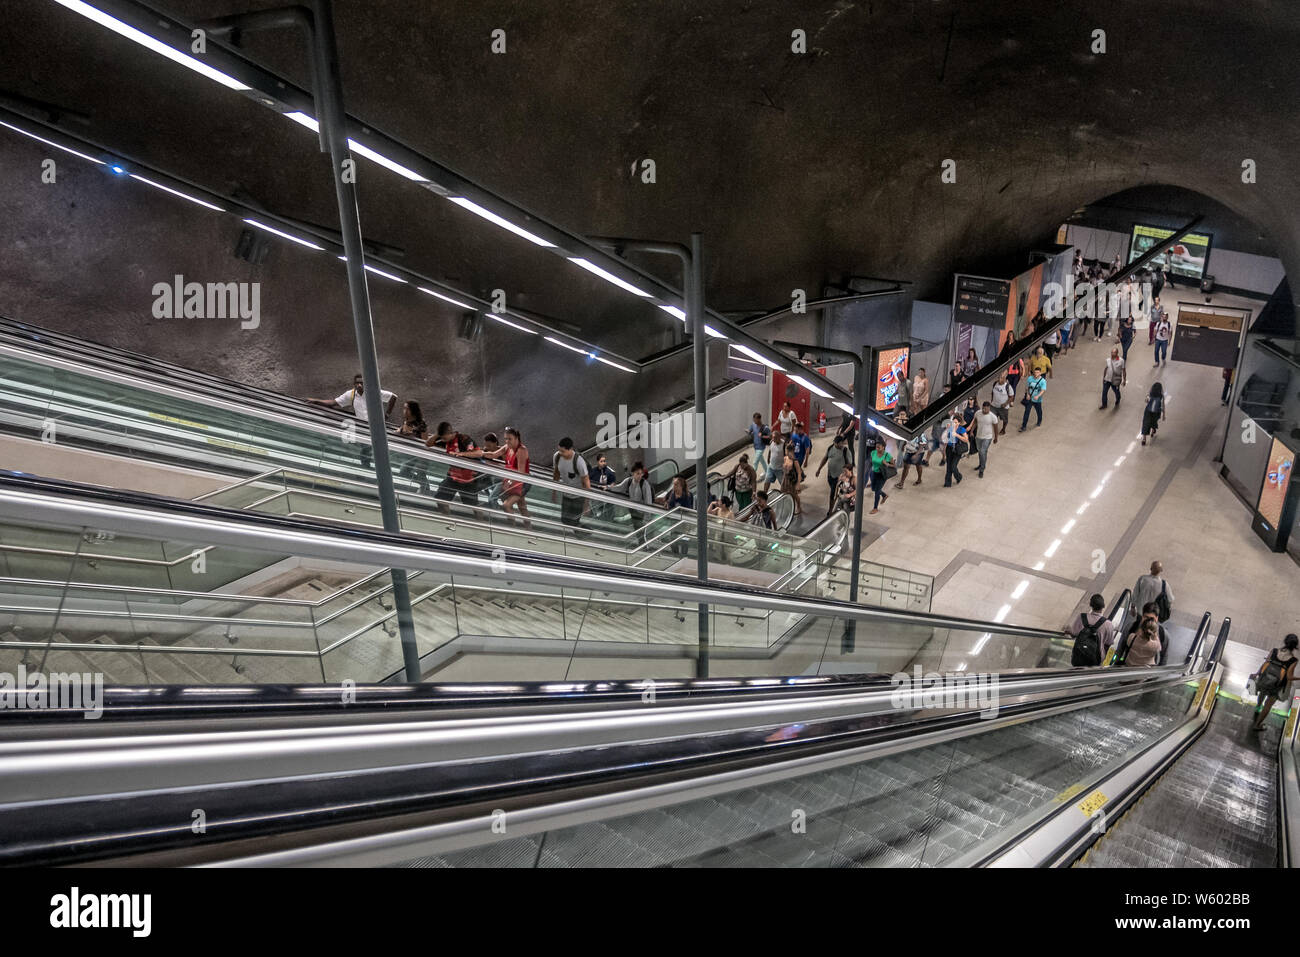 Rio de Janeiro, Brazil - June 05, 2019: people waking to the staricase exiting the metro at the General Osorio Station, Ipanema. Stock Photo